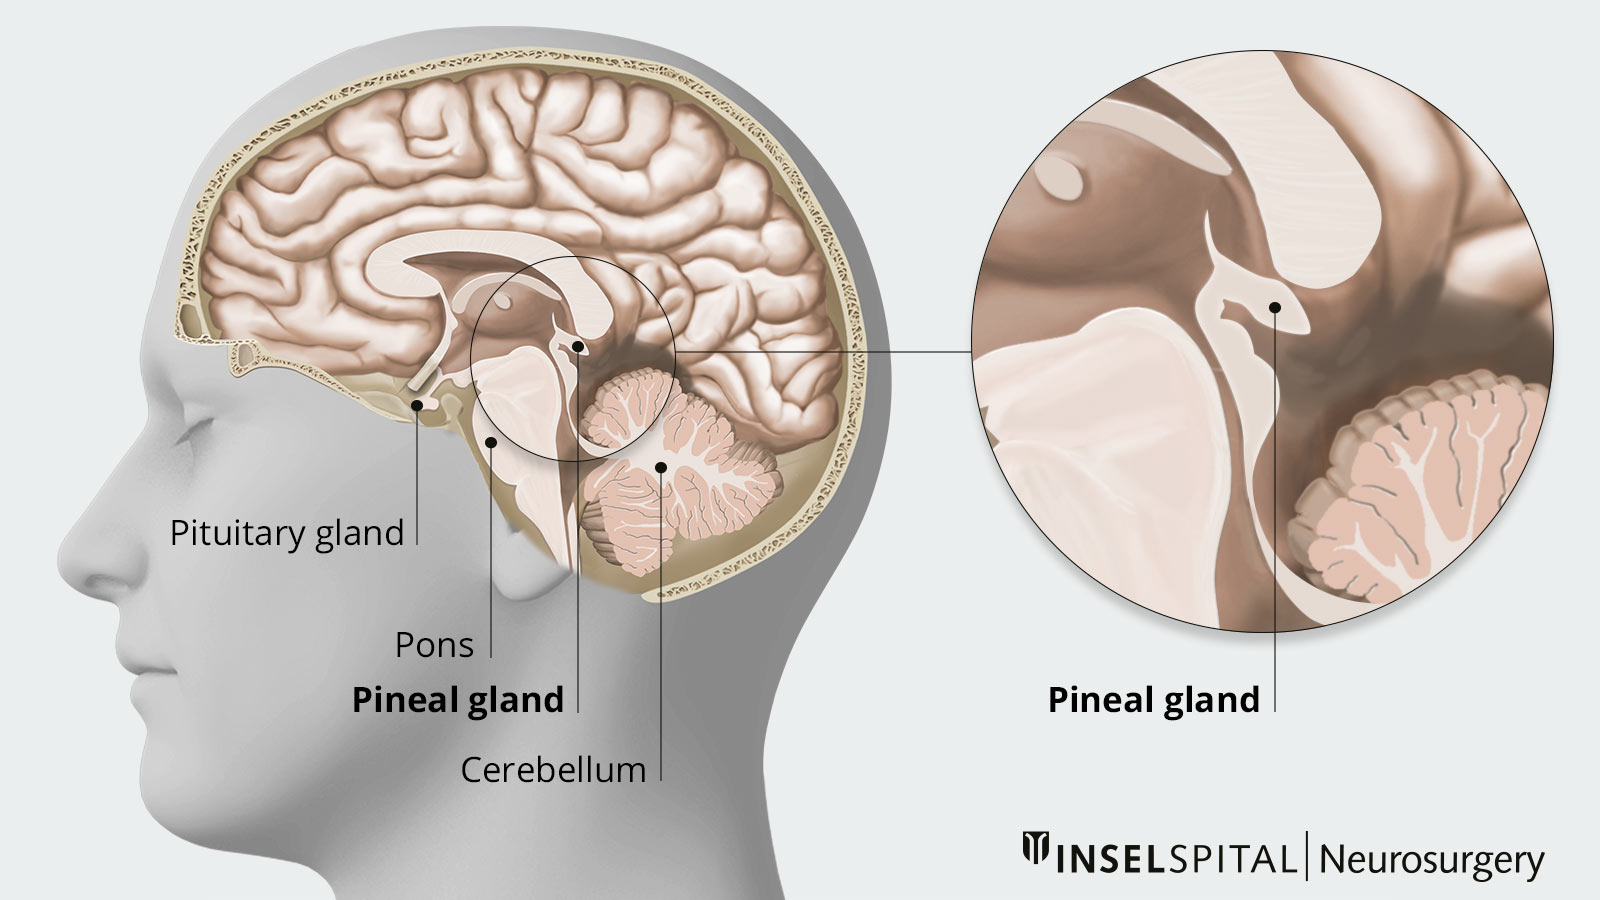 Cross-sectional drawing of the brain with pituitary gland, bridge, pineal gland, cerebellum